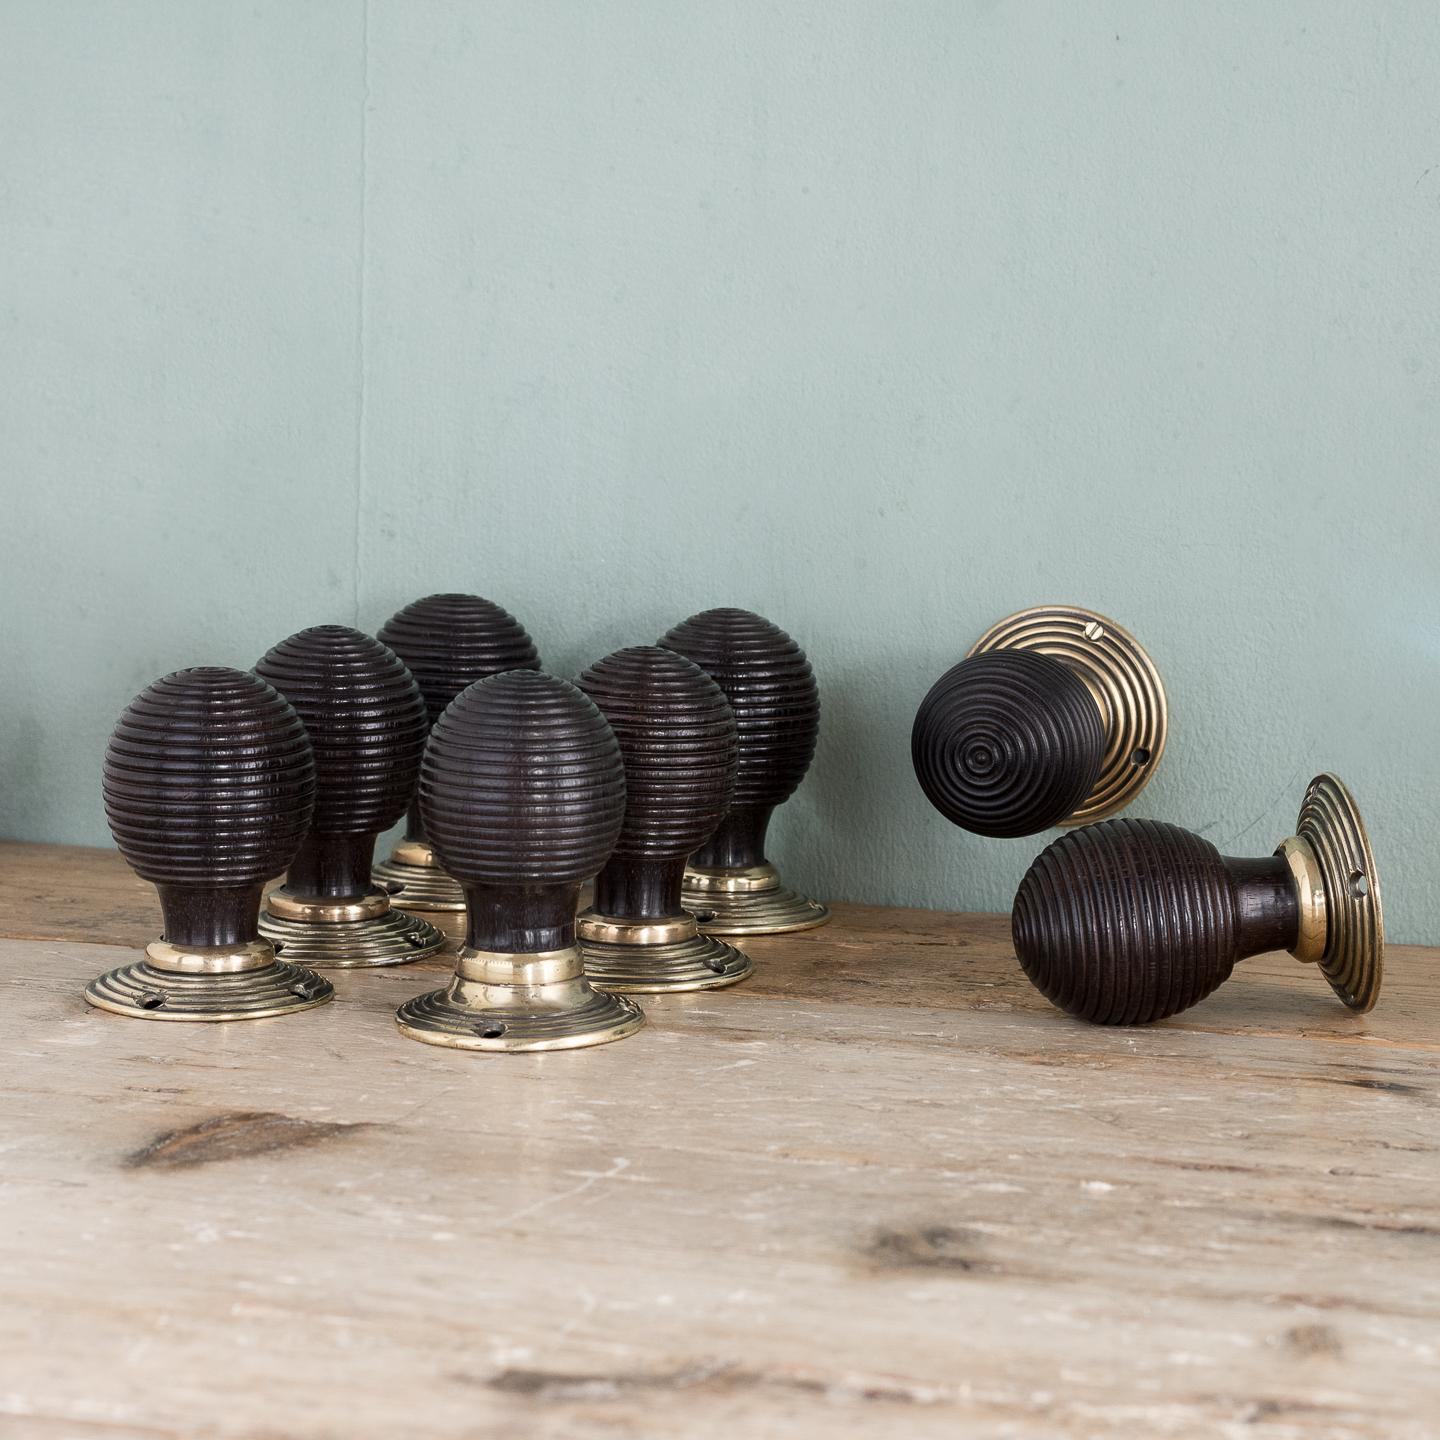 Victorian ebony beehive door knobs, with reeded decoration to the body and the brass back-plates, four pairs available.